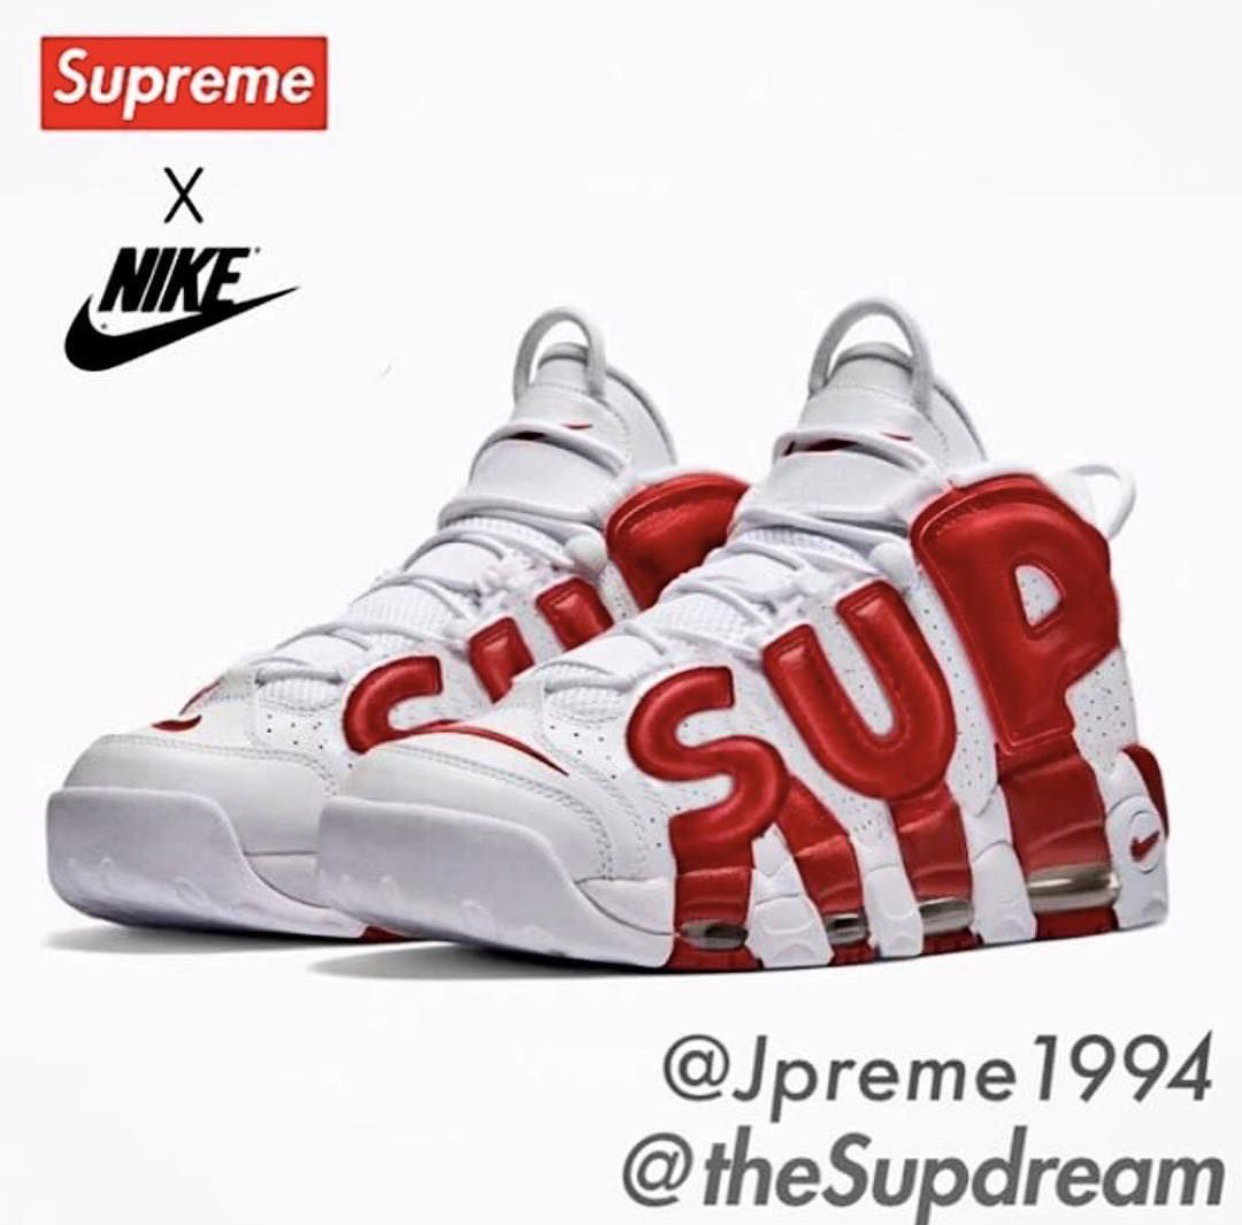 Heated Sneaks on Twitter: "Another Supreme x Nike Uptempo "Suptempo